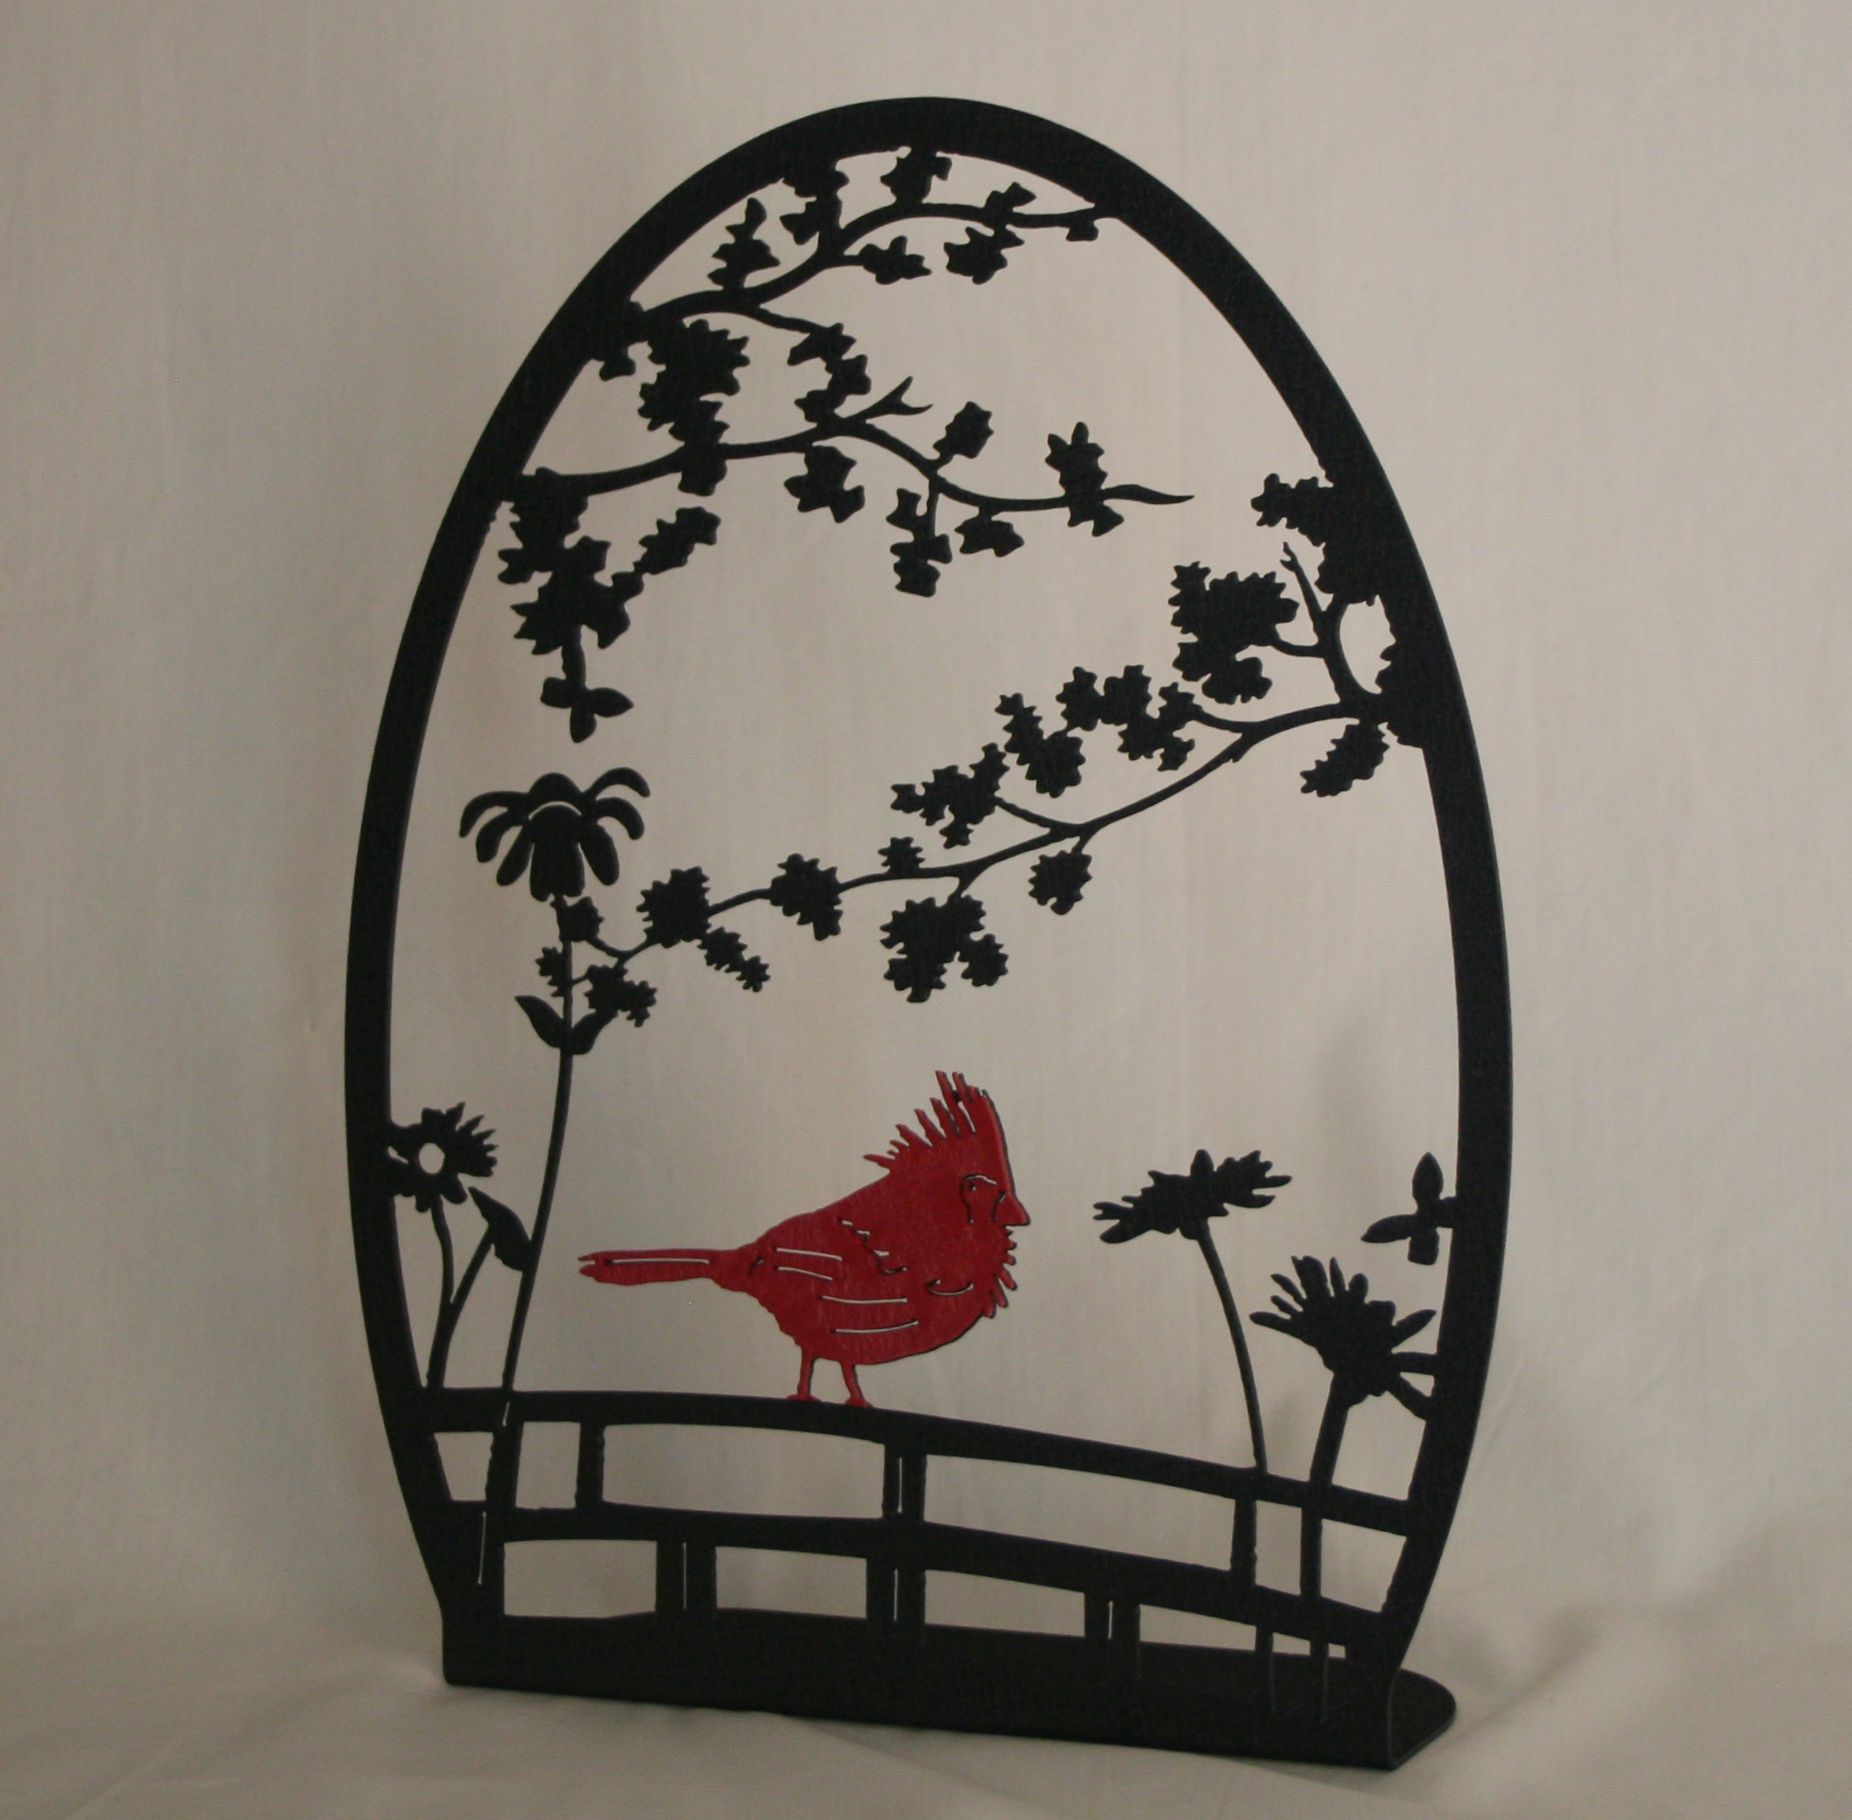 Freestanding Metal Art, Red Cardinal, Fence, Flowers, Branches